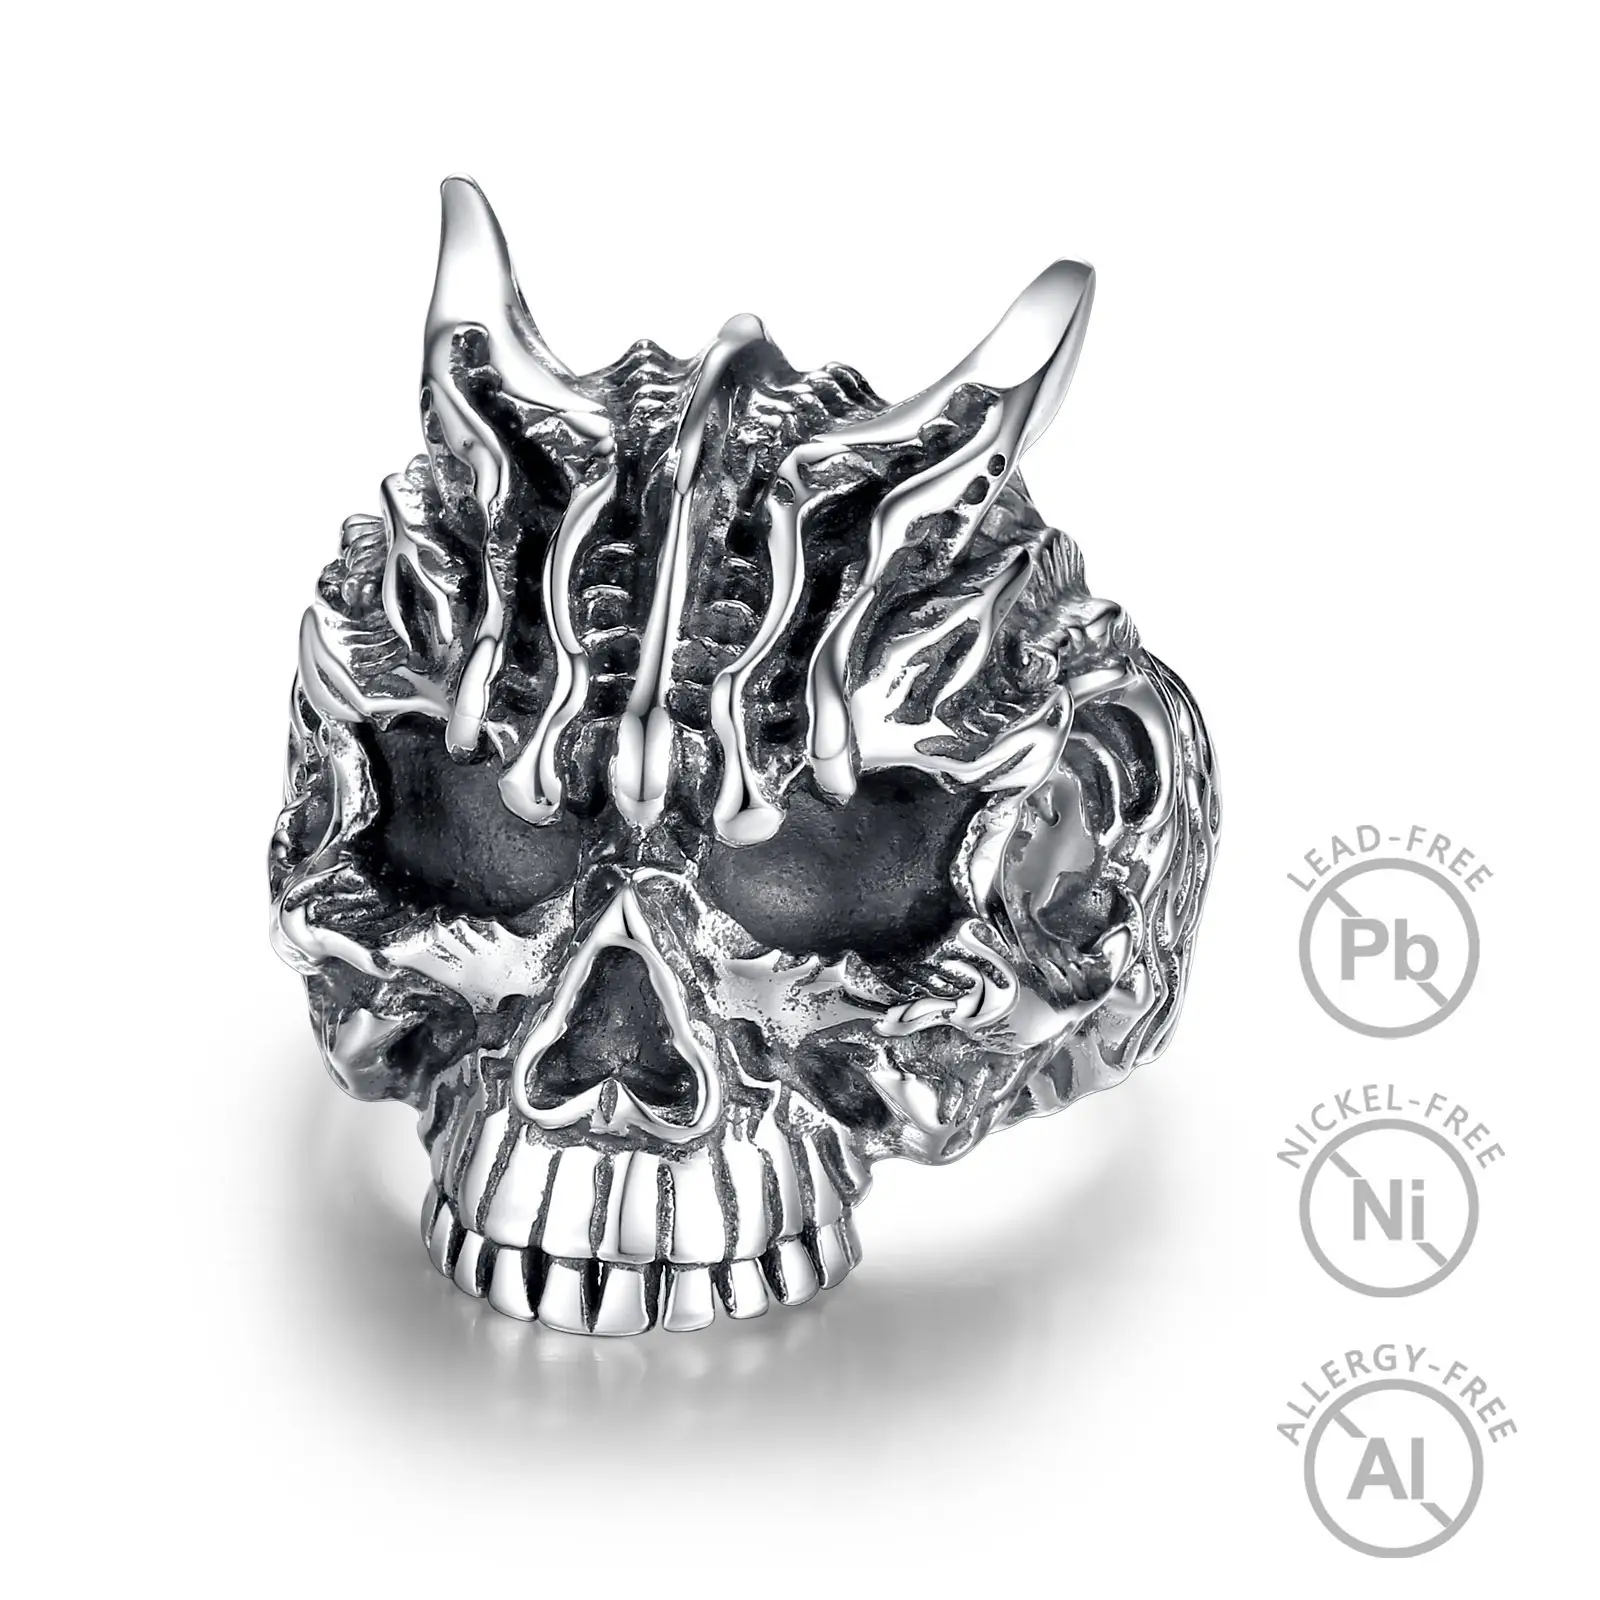 Merryshine wholesale 925 Sterling silver punk viking death pirate gothic mens lucifer skull ring